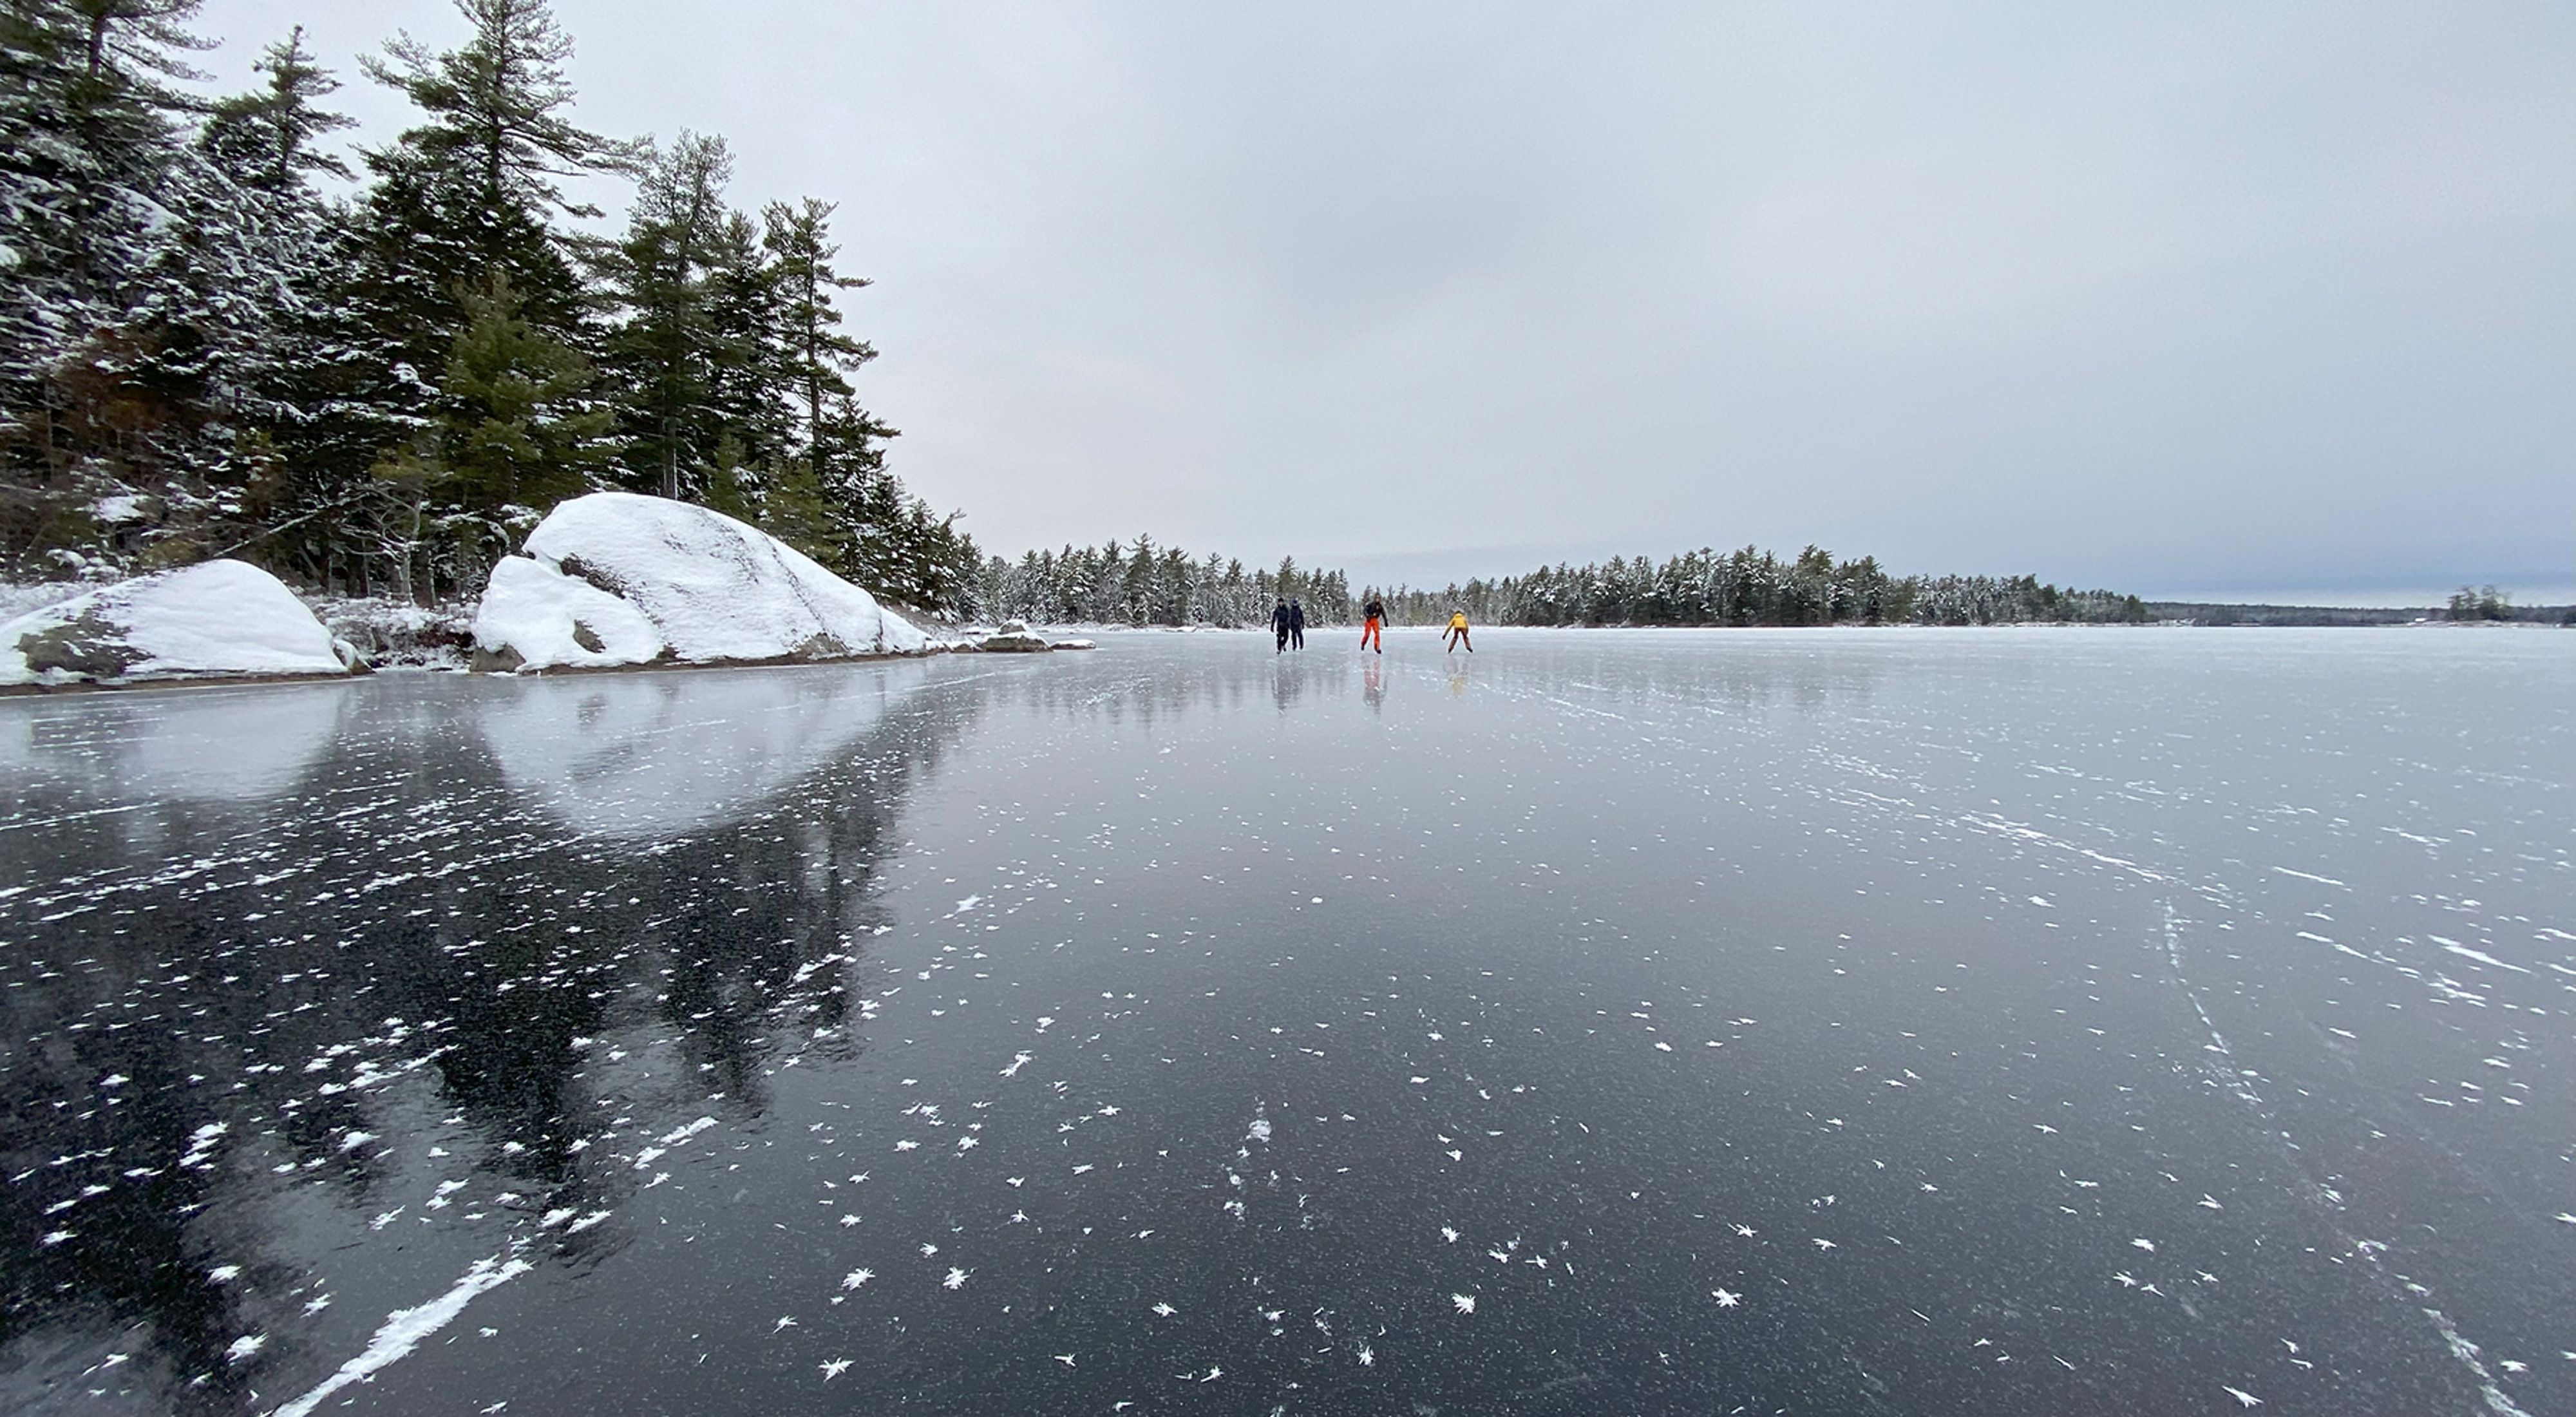 People skating on a frozen lake with surrounding snow-covered forest.